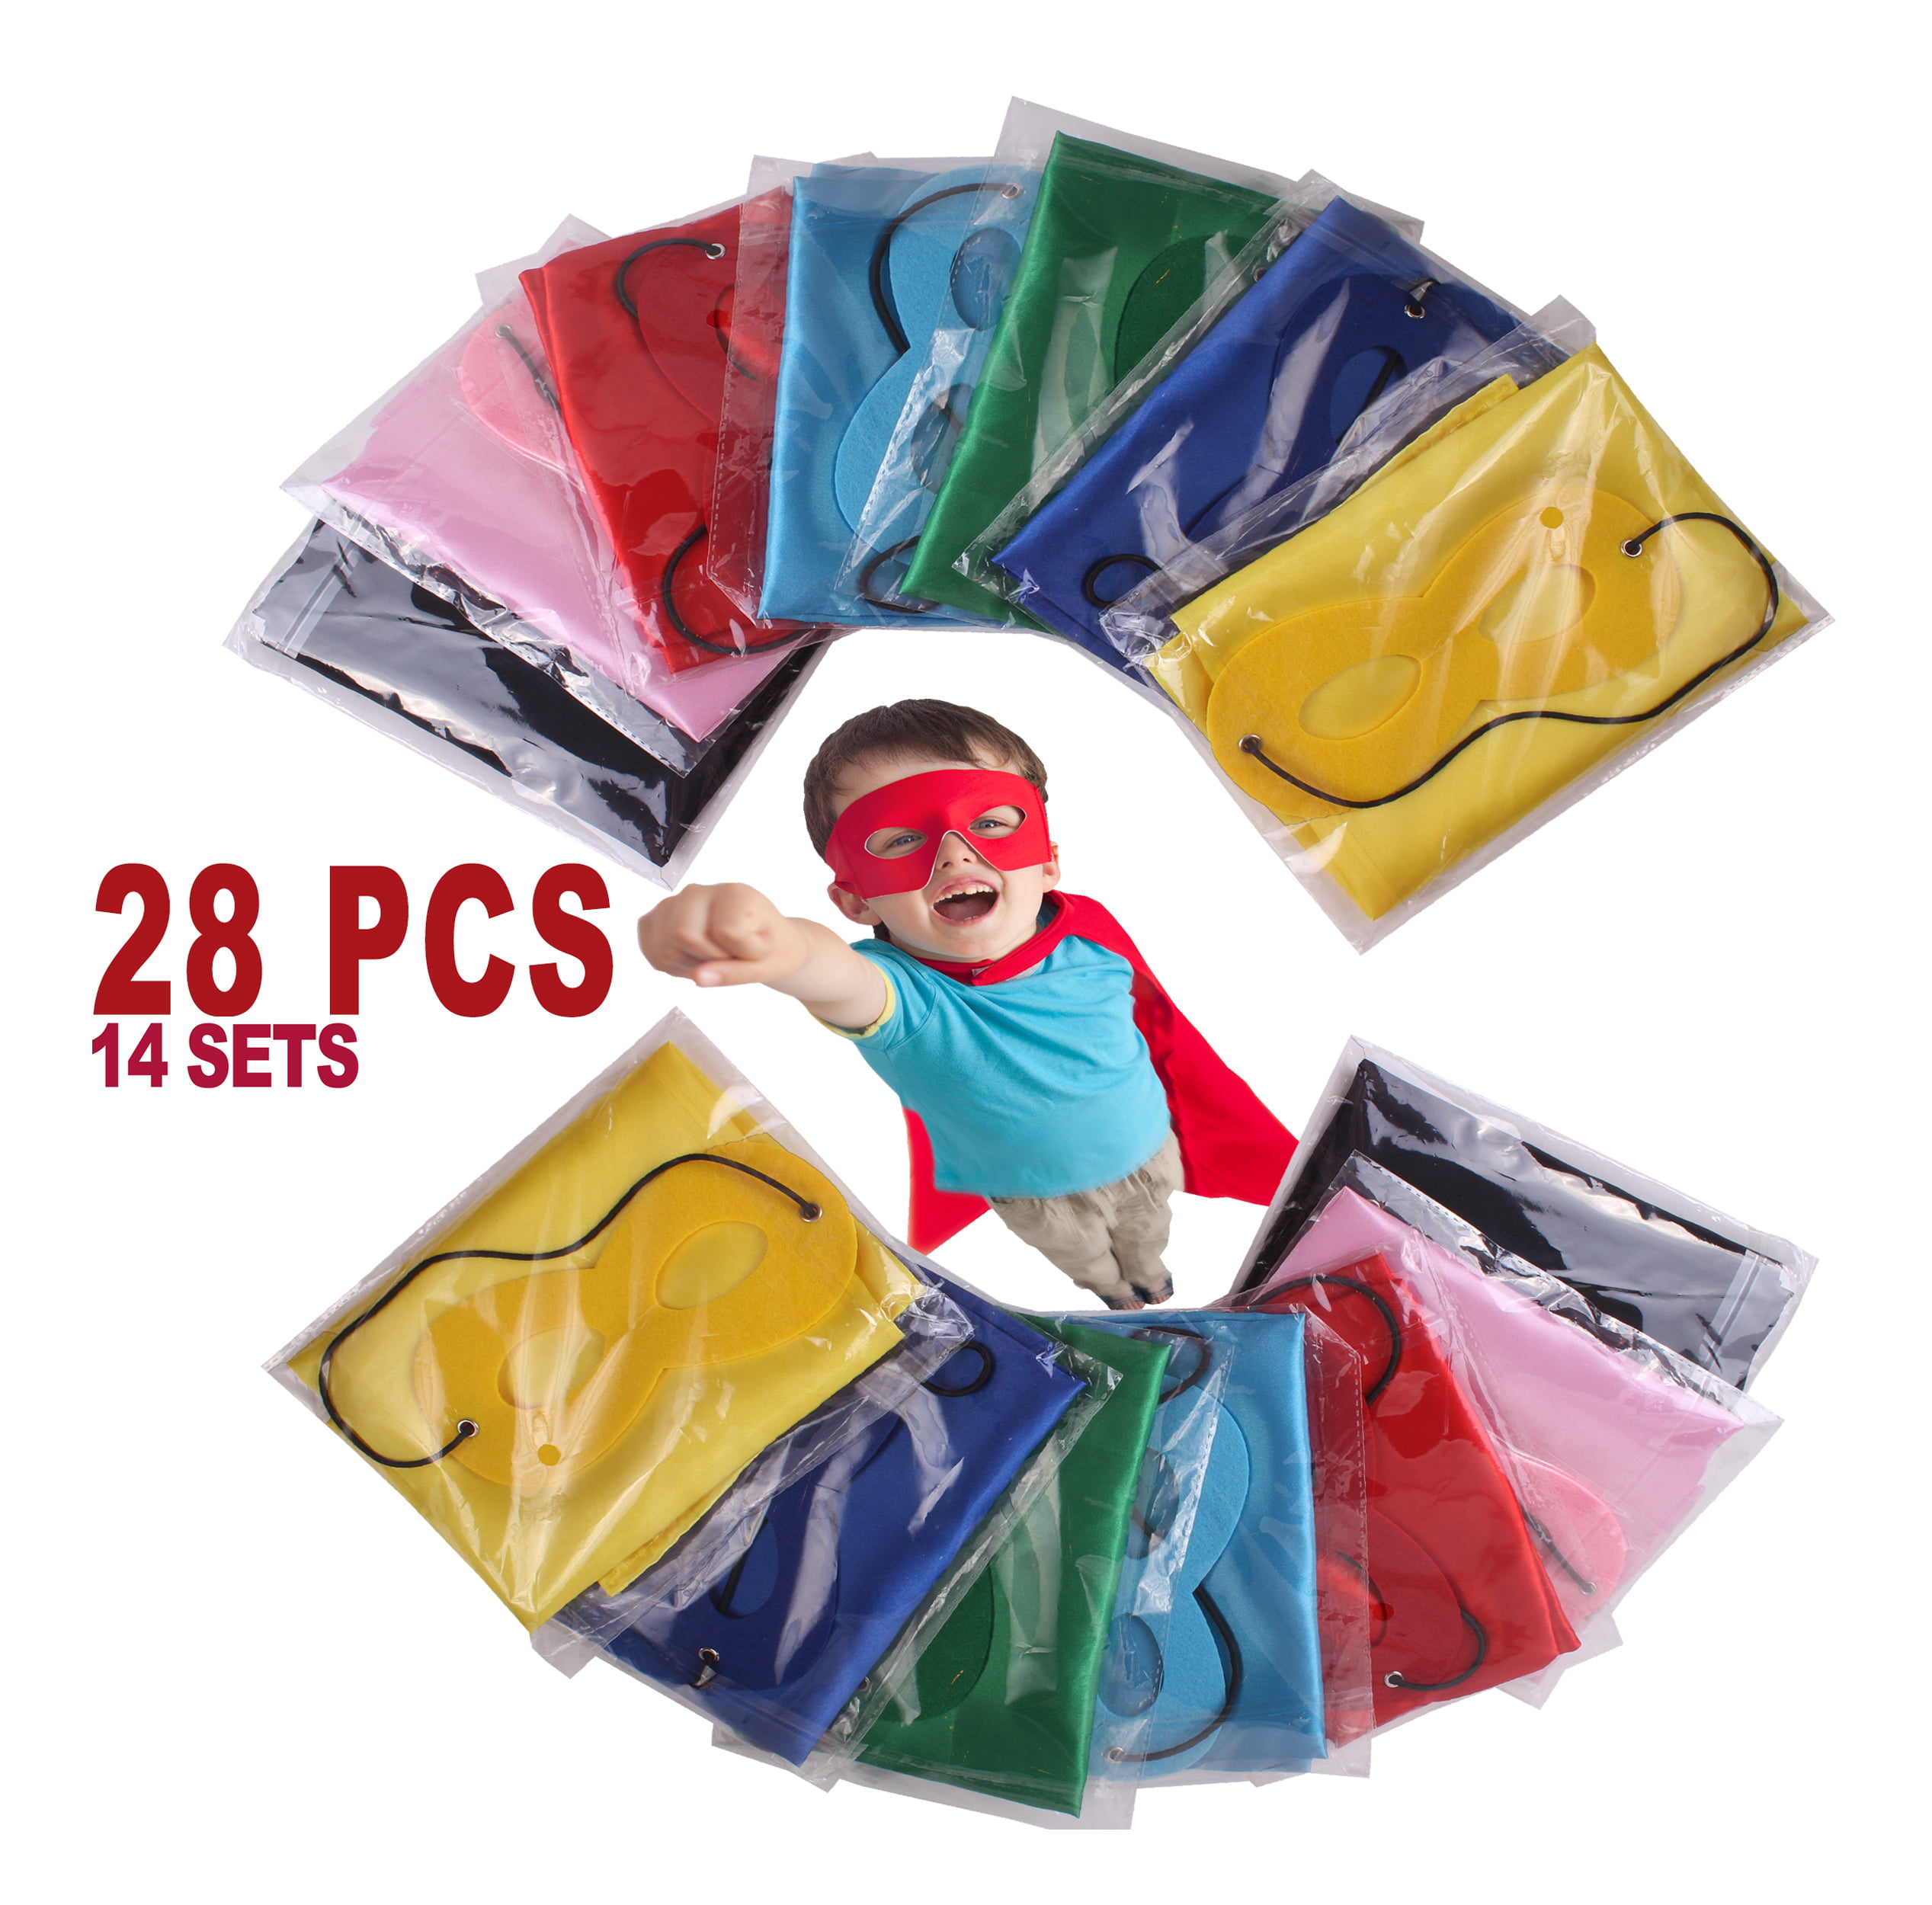 RANAVY Superhero Capes for Kids/Adult with Masks-Flash Dress Up Birthday Party Favors 26 Letters 10 Numbers Initial Blue/Red